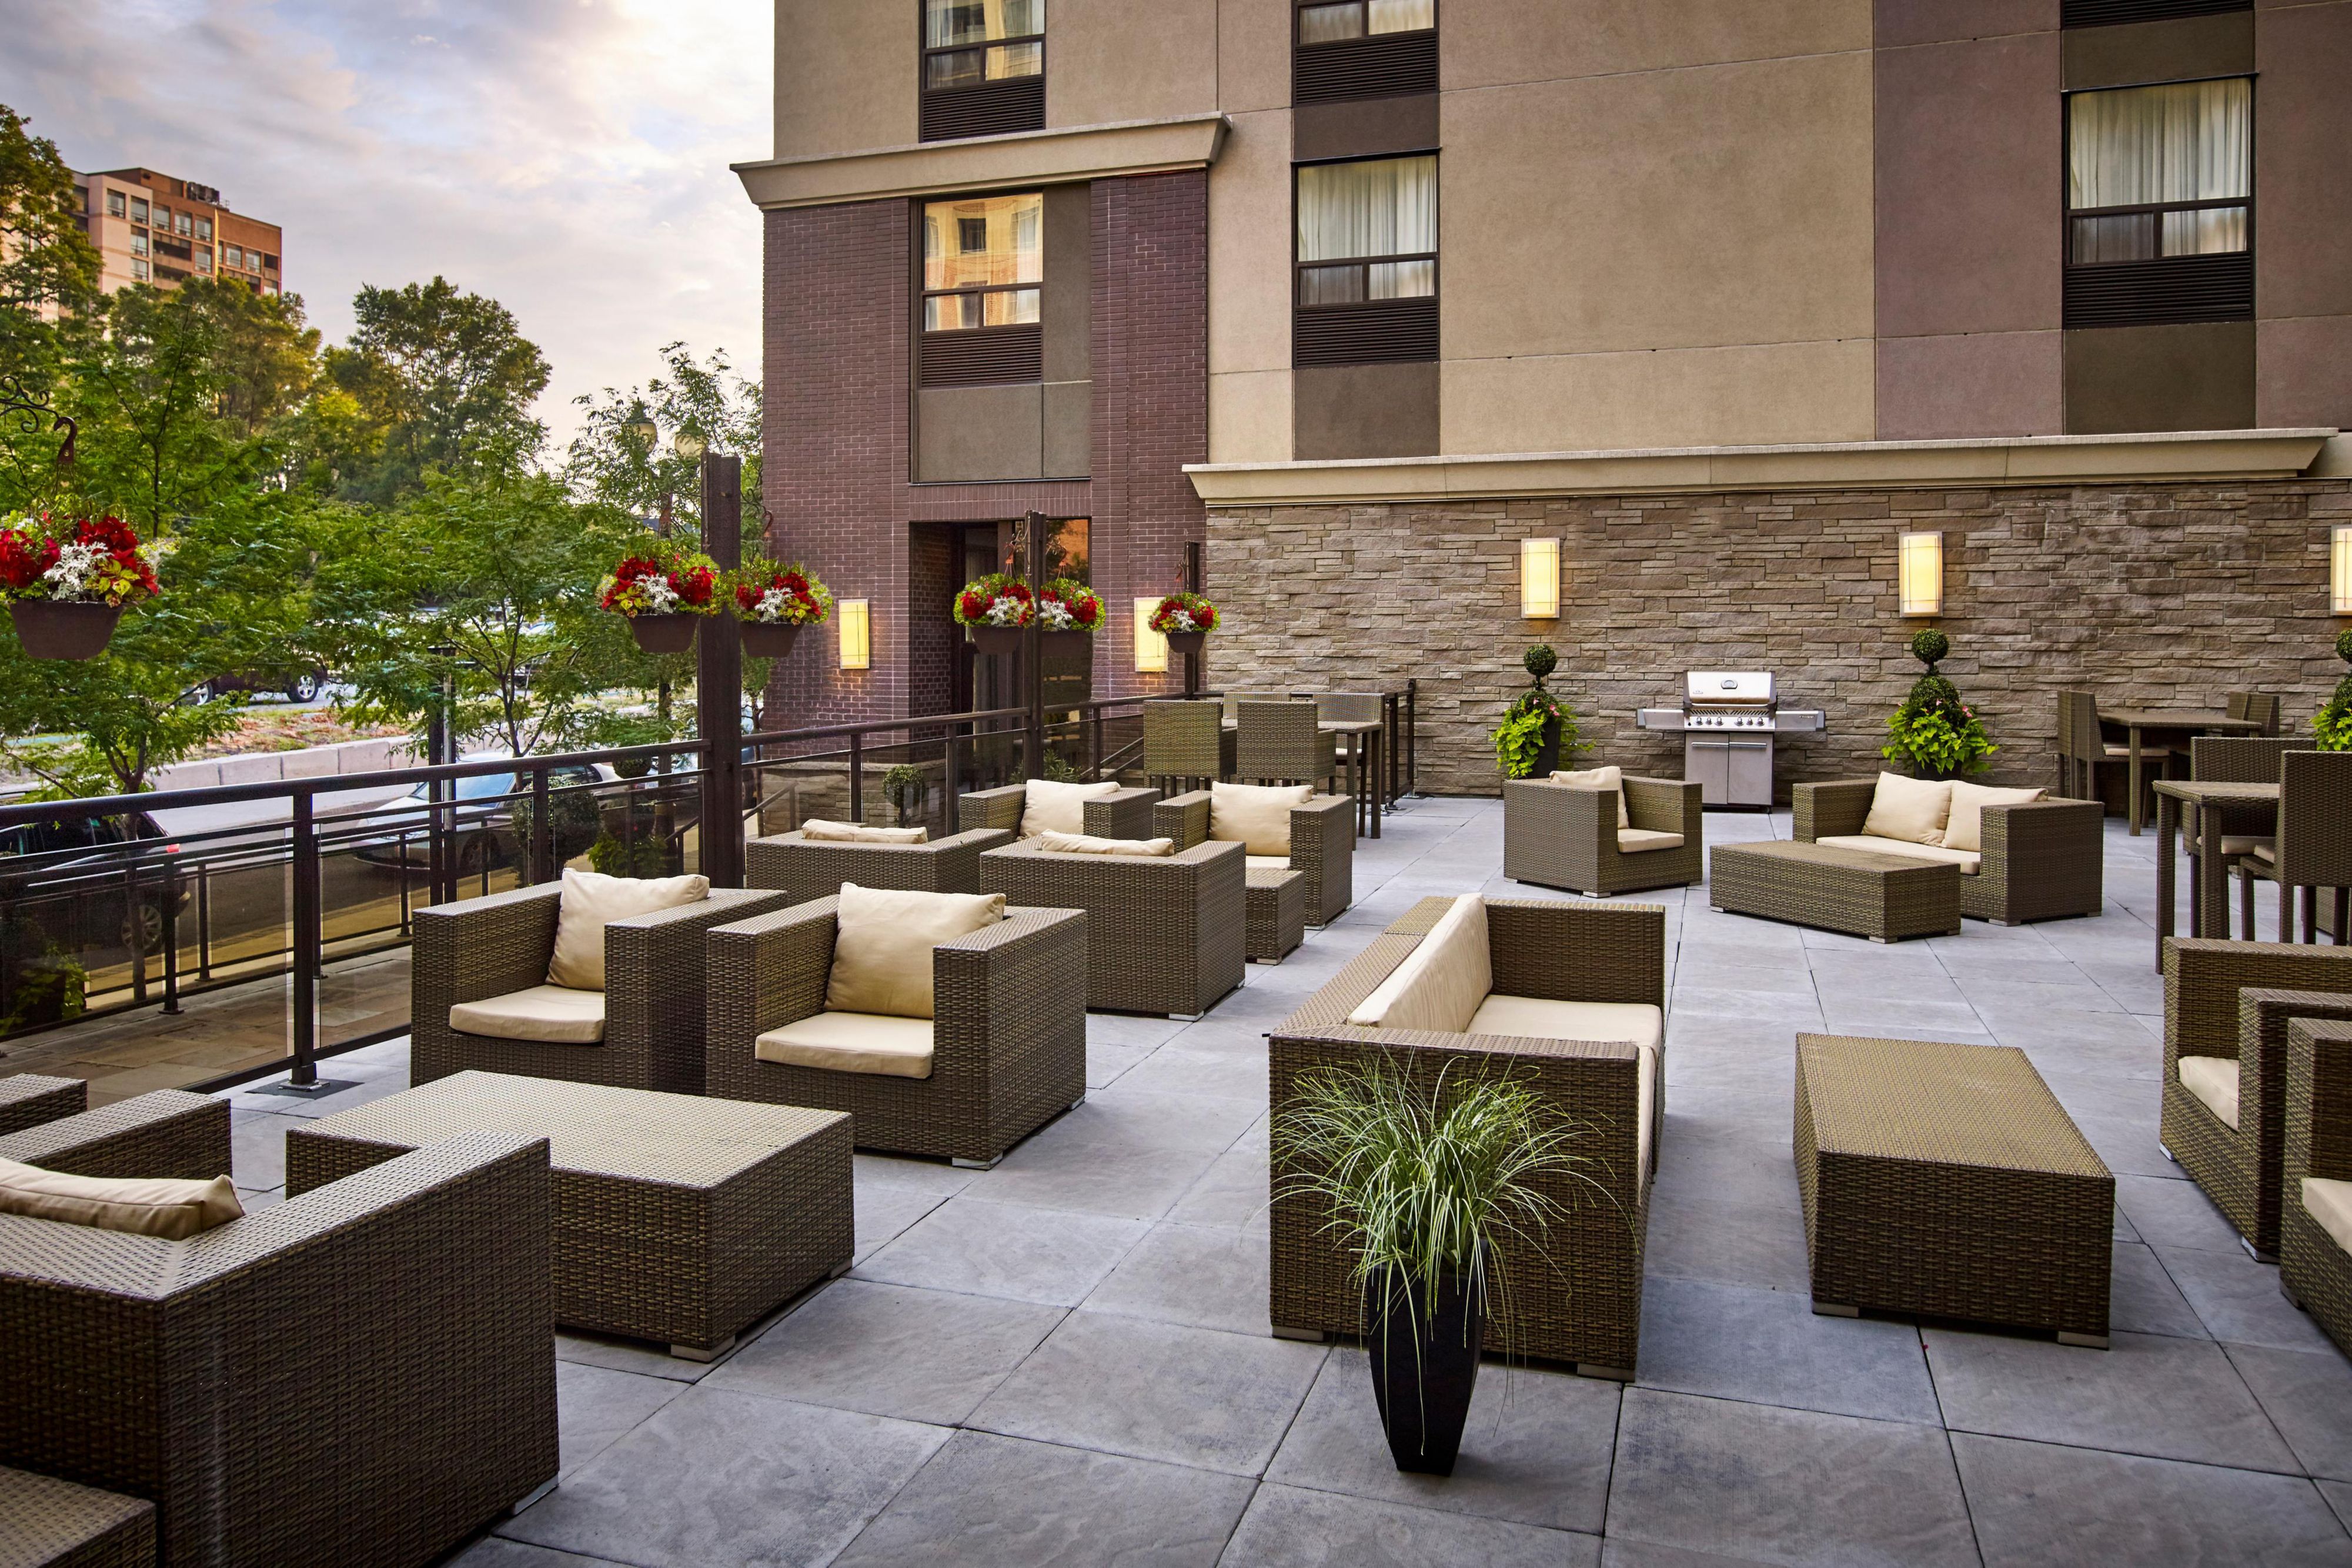 Enjoy year round access to our outdoor patio, unique to the downtown core. Enjoy Barbecuing at your own leisure 7 days a week 365 days a year with our onsite gas BBQ.